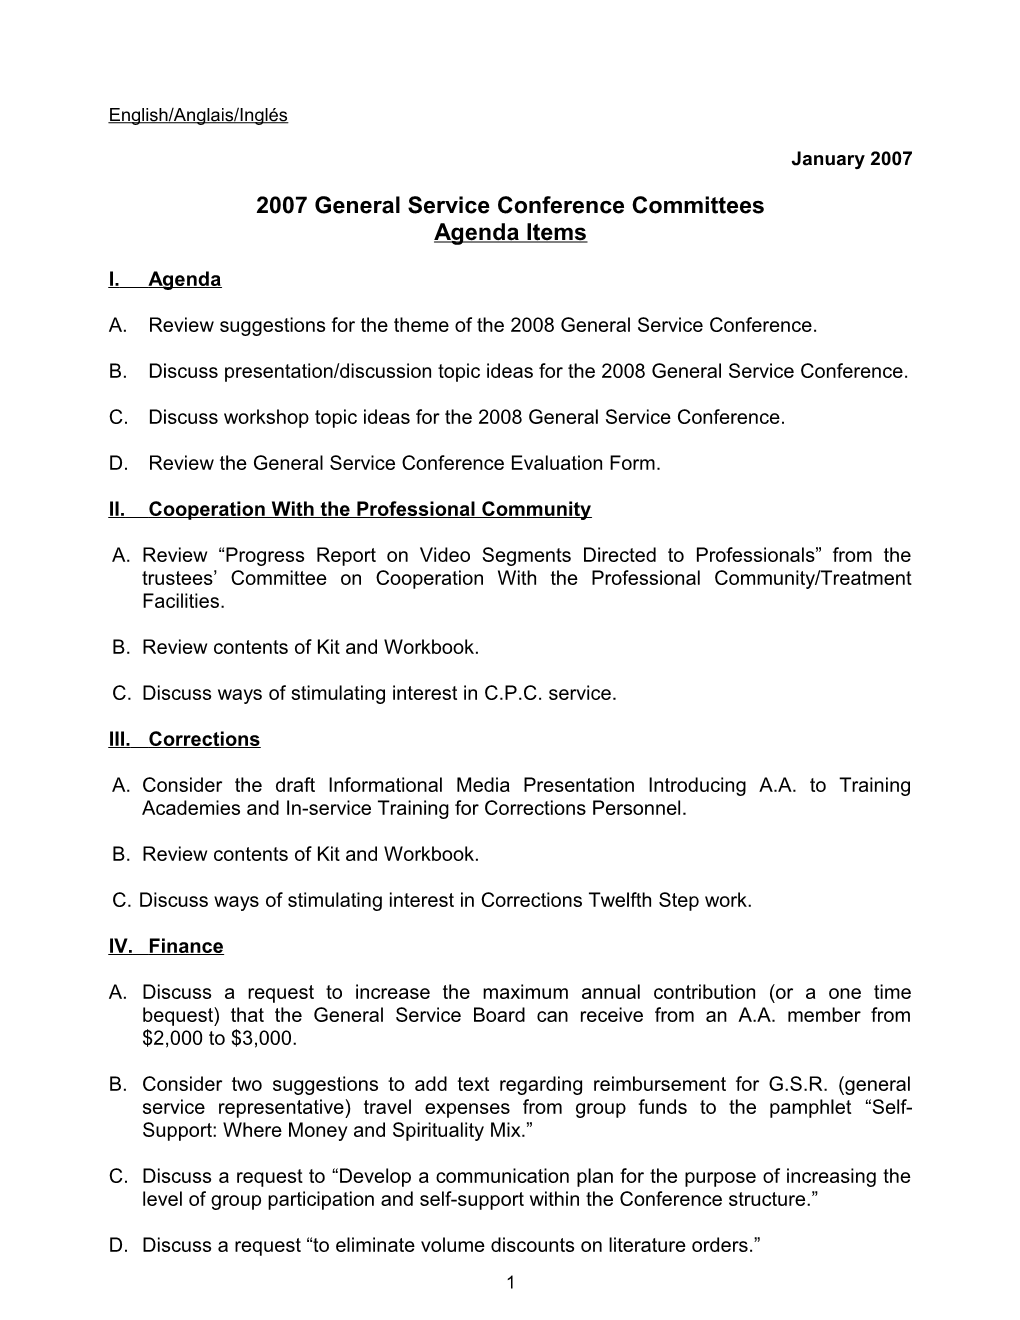 2007 General Service Conference Committees